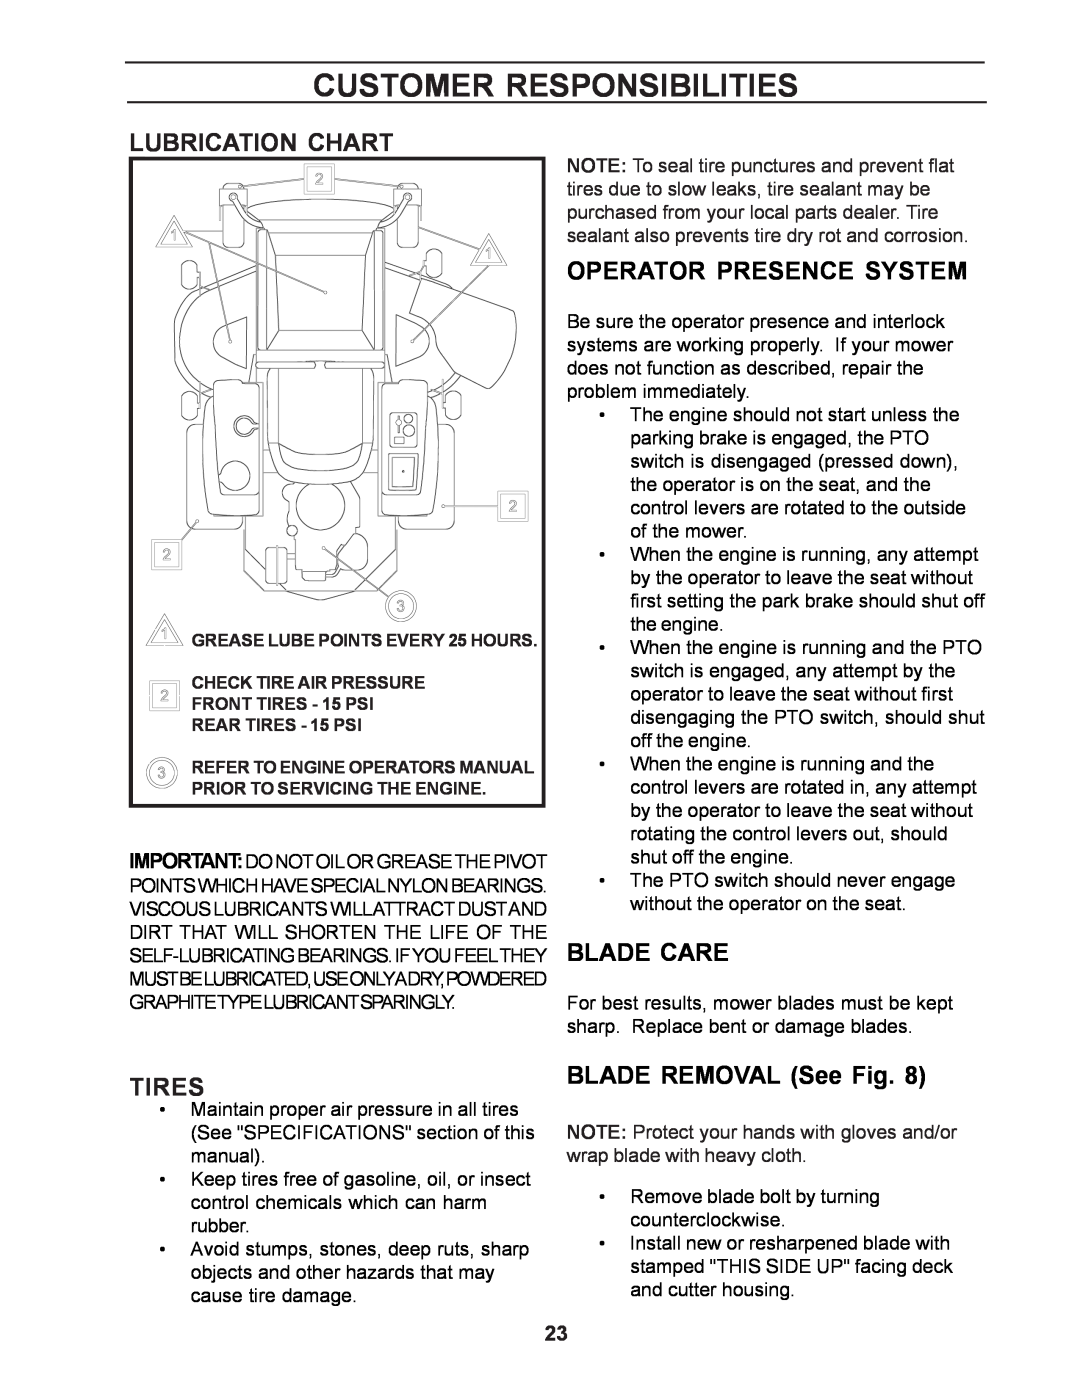 Yazoo/Kees ZCBI48181 manual Lubrication Chart, Operator Presence System, Blade Care, Tires, BLADE REMOVAL See Fig 